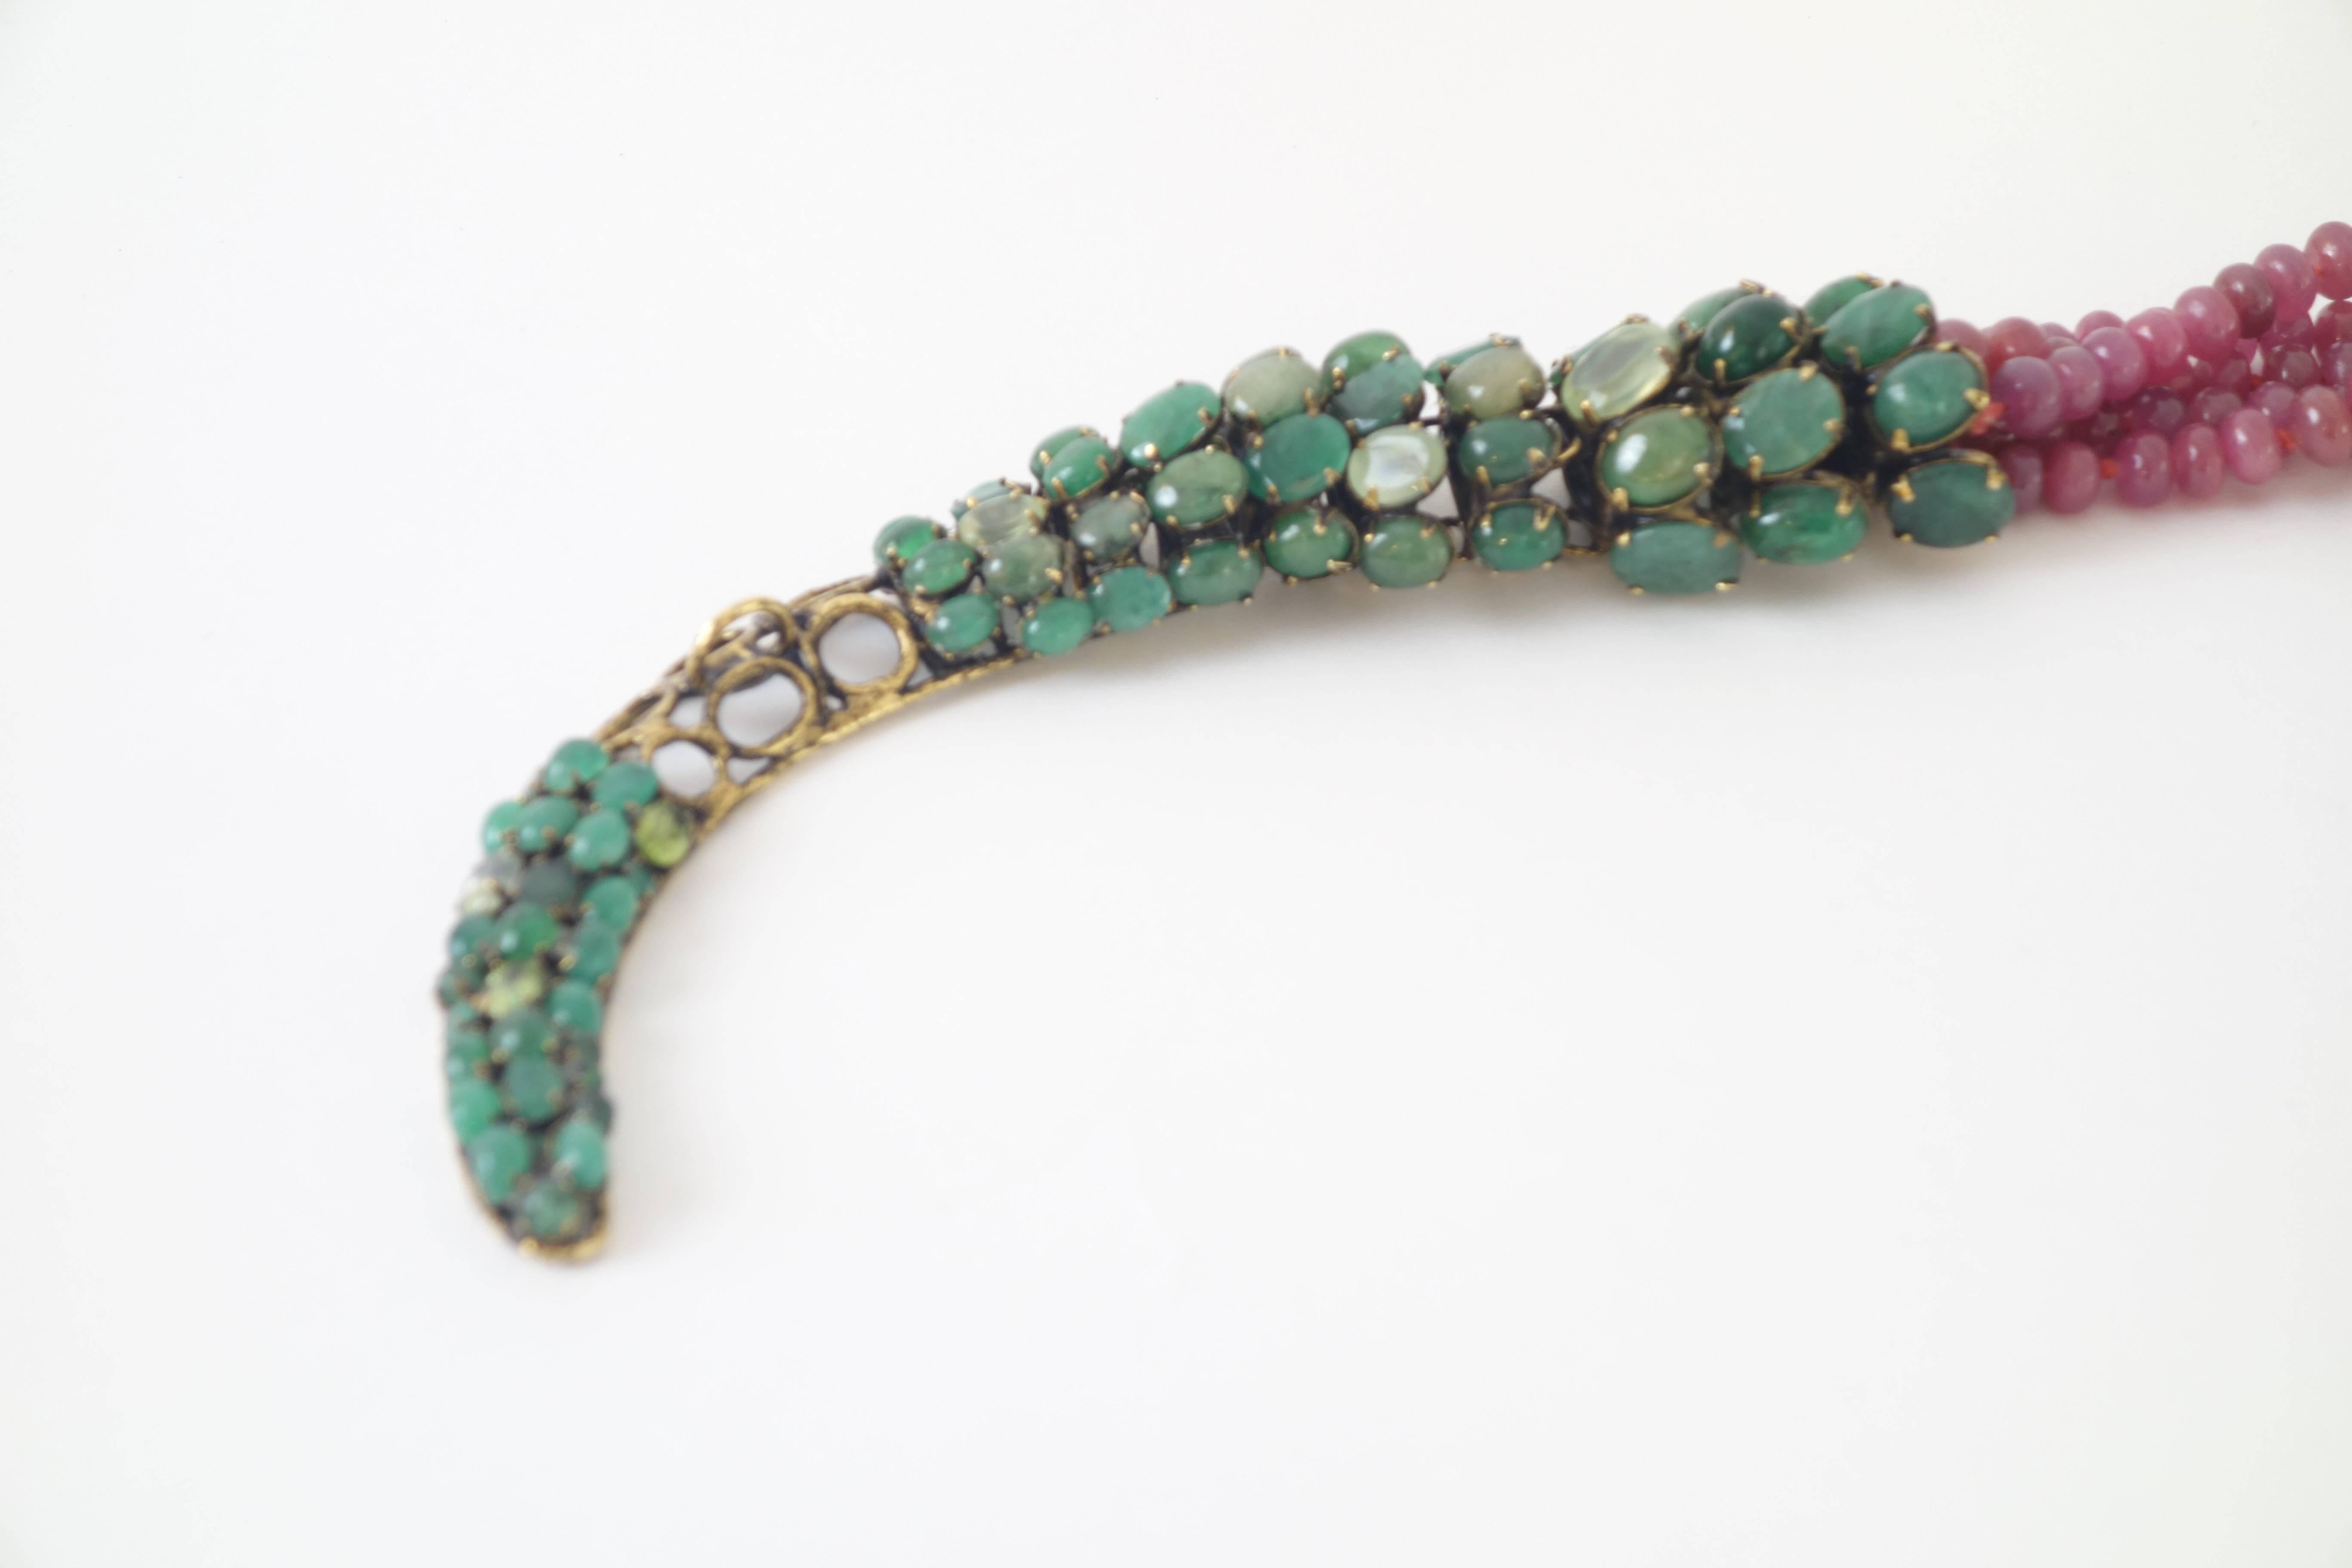 Polished Necklace by Iradj Moini, with a Blend of Emerald, Ruby and Swarovski Crystal